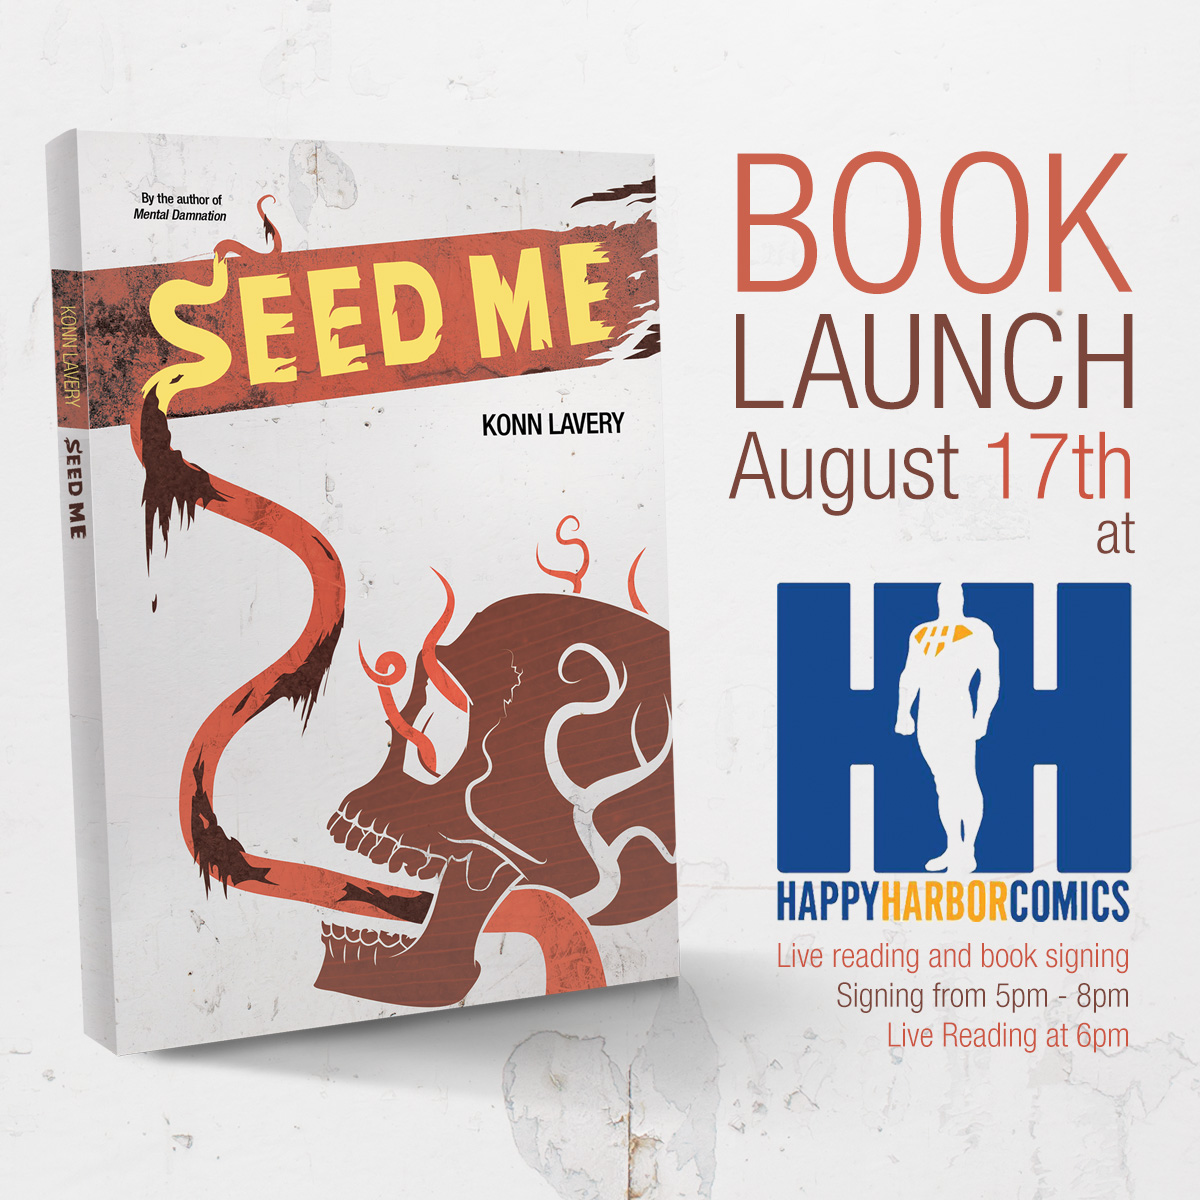 Seed Me Book Launch and Live Reading at Happy Harbor Comics